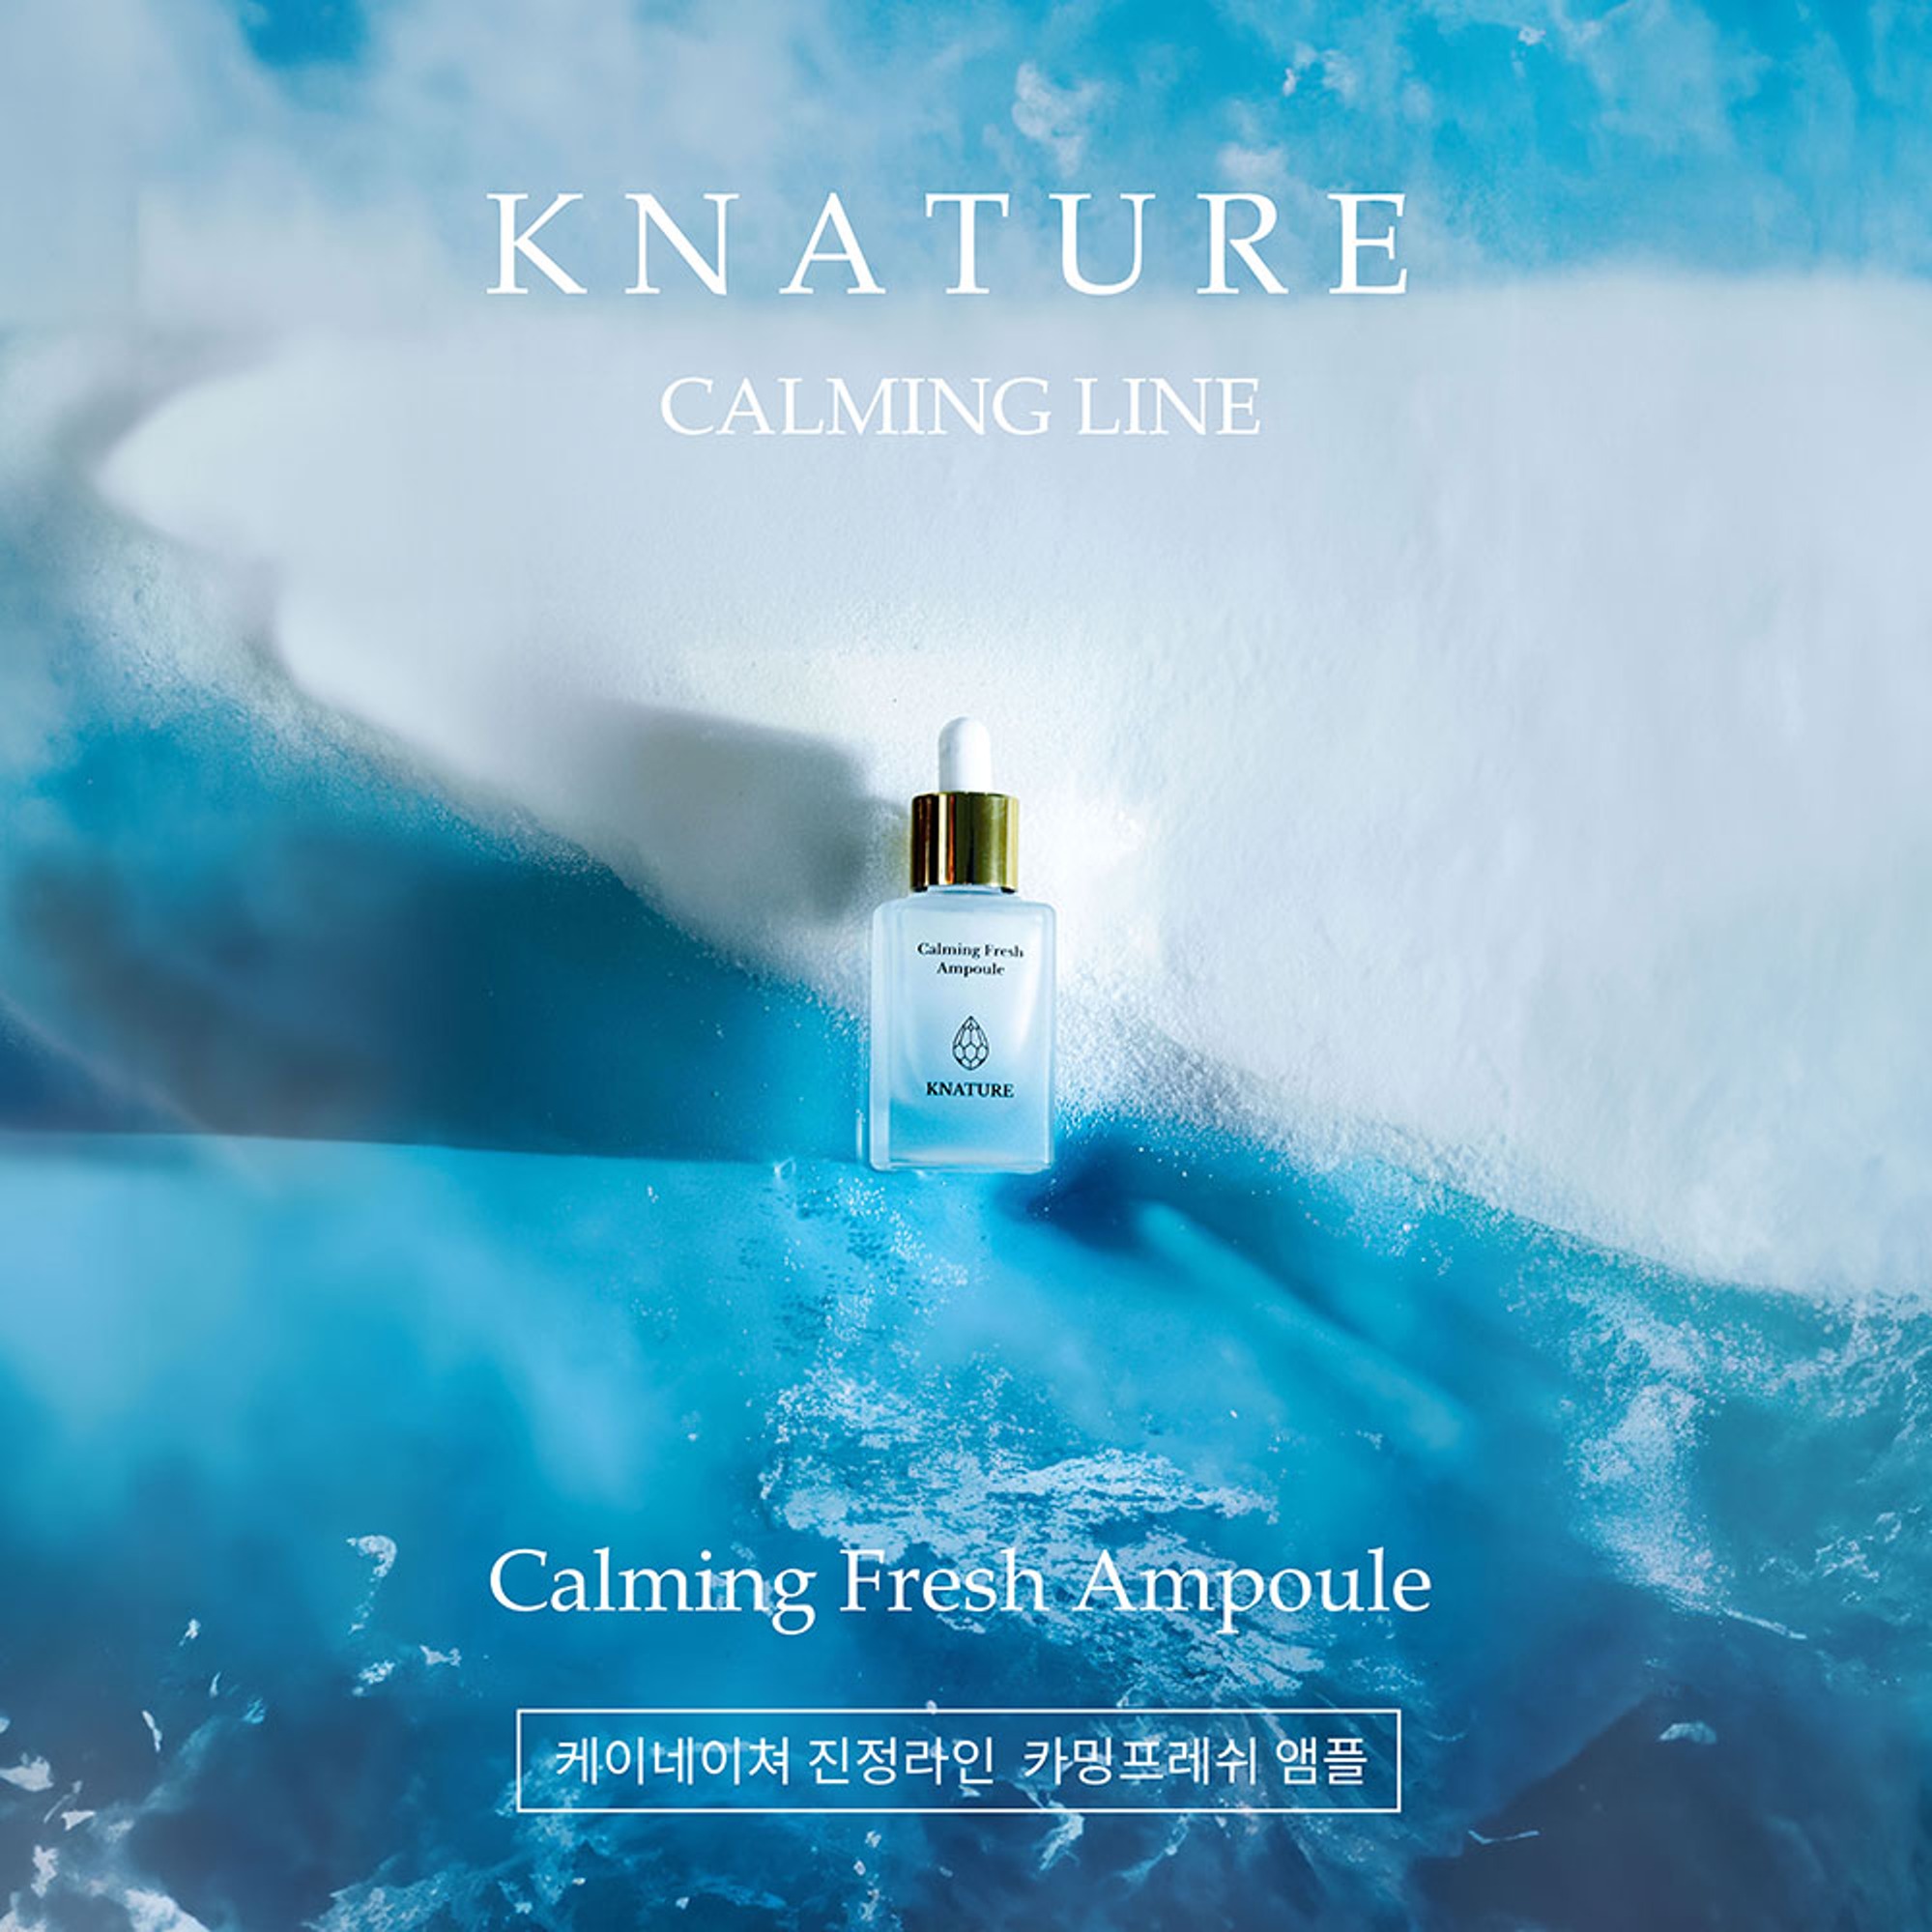 Calming Fresh Soothing Ample.